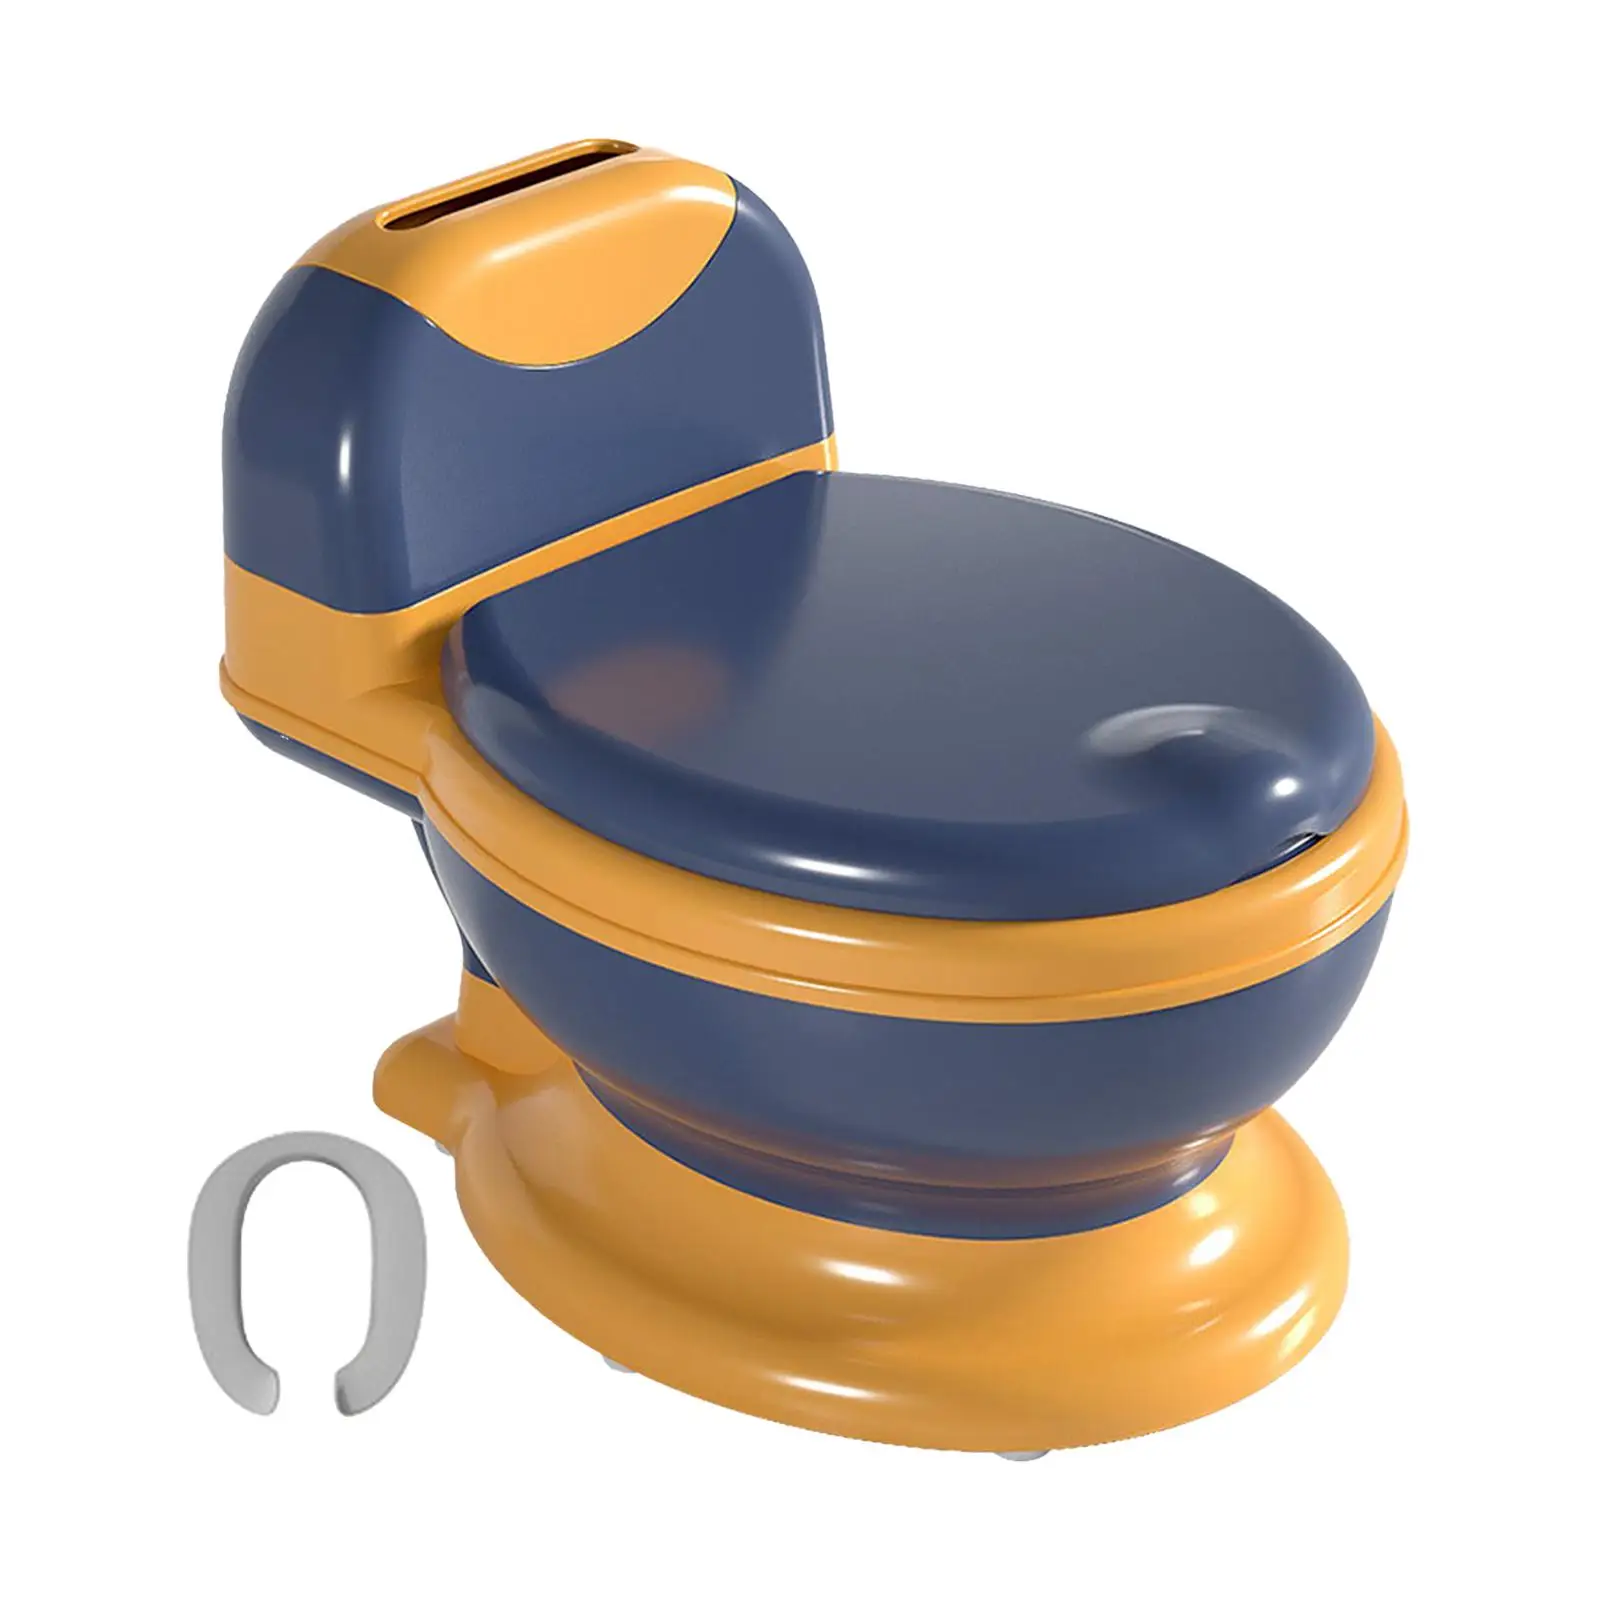 Potty Train Toilet Portable Detachable Comfortable Realistic Toilet Real Feel Potty for Kids Baby Children Toddlers Girls